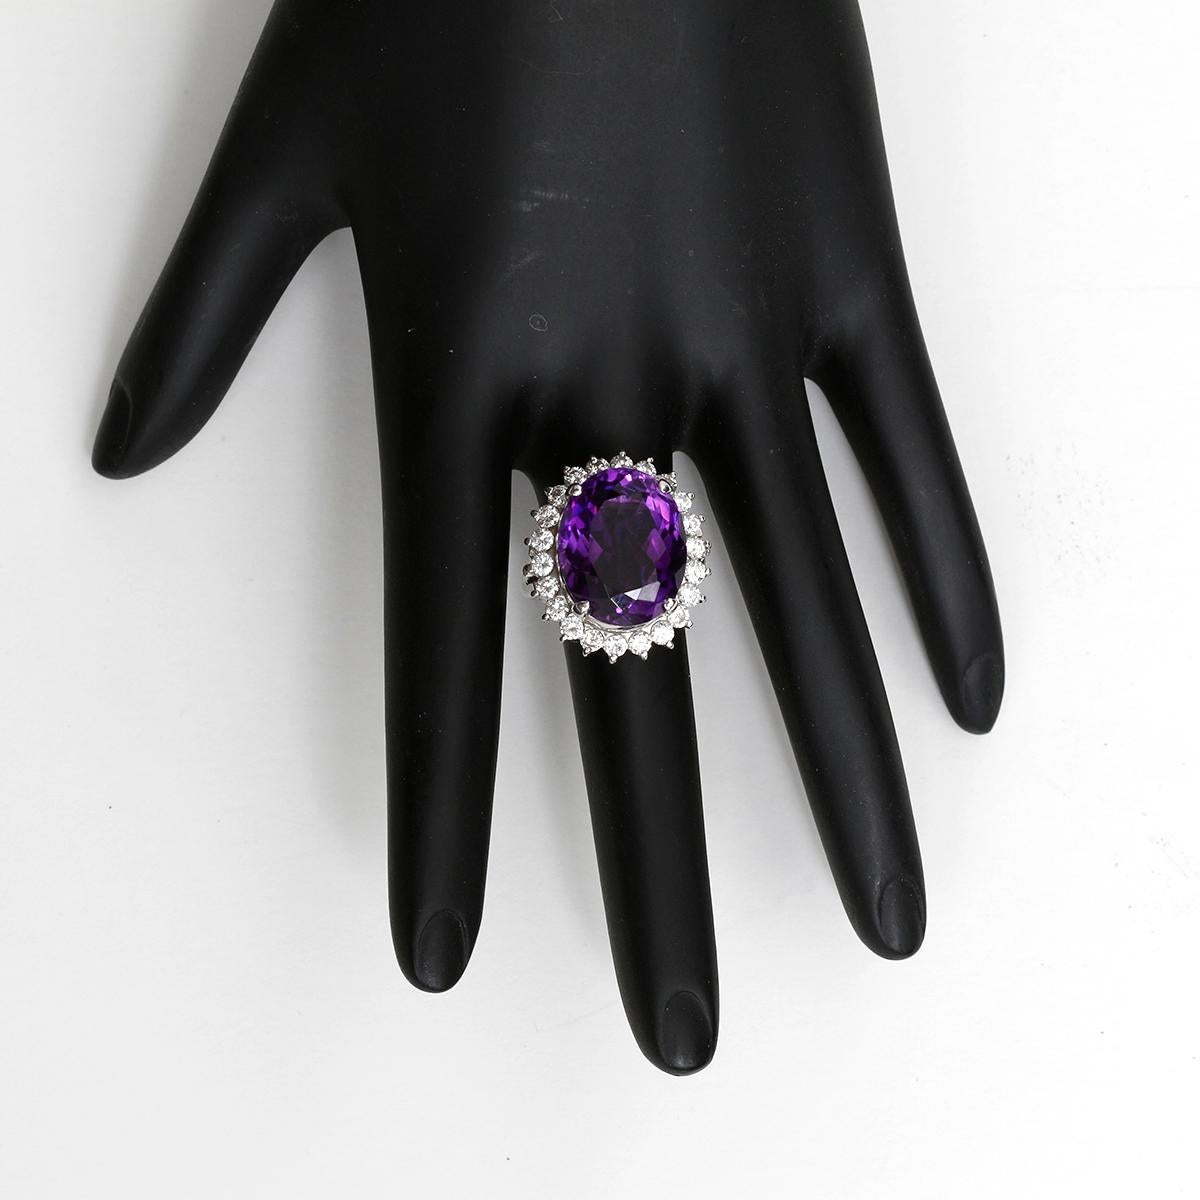 Platinum Purple Amethyst and Diamond Ring  - Dazzling platinum ring with oval amethyst measuring 16.85x13.63x9.21 mm and weighs approx 11.89 cts. The Purple gem is surrounded by full-cut diamonds weighing approx 1.37 cts. Total weight is 16 grams